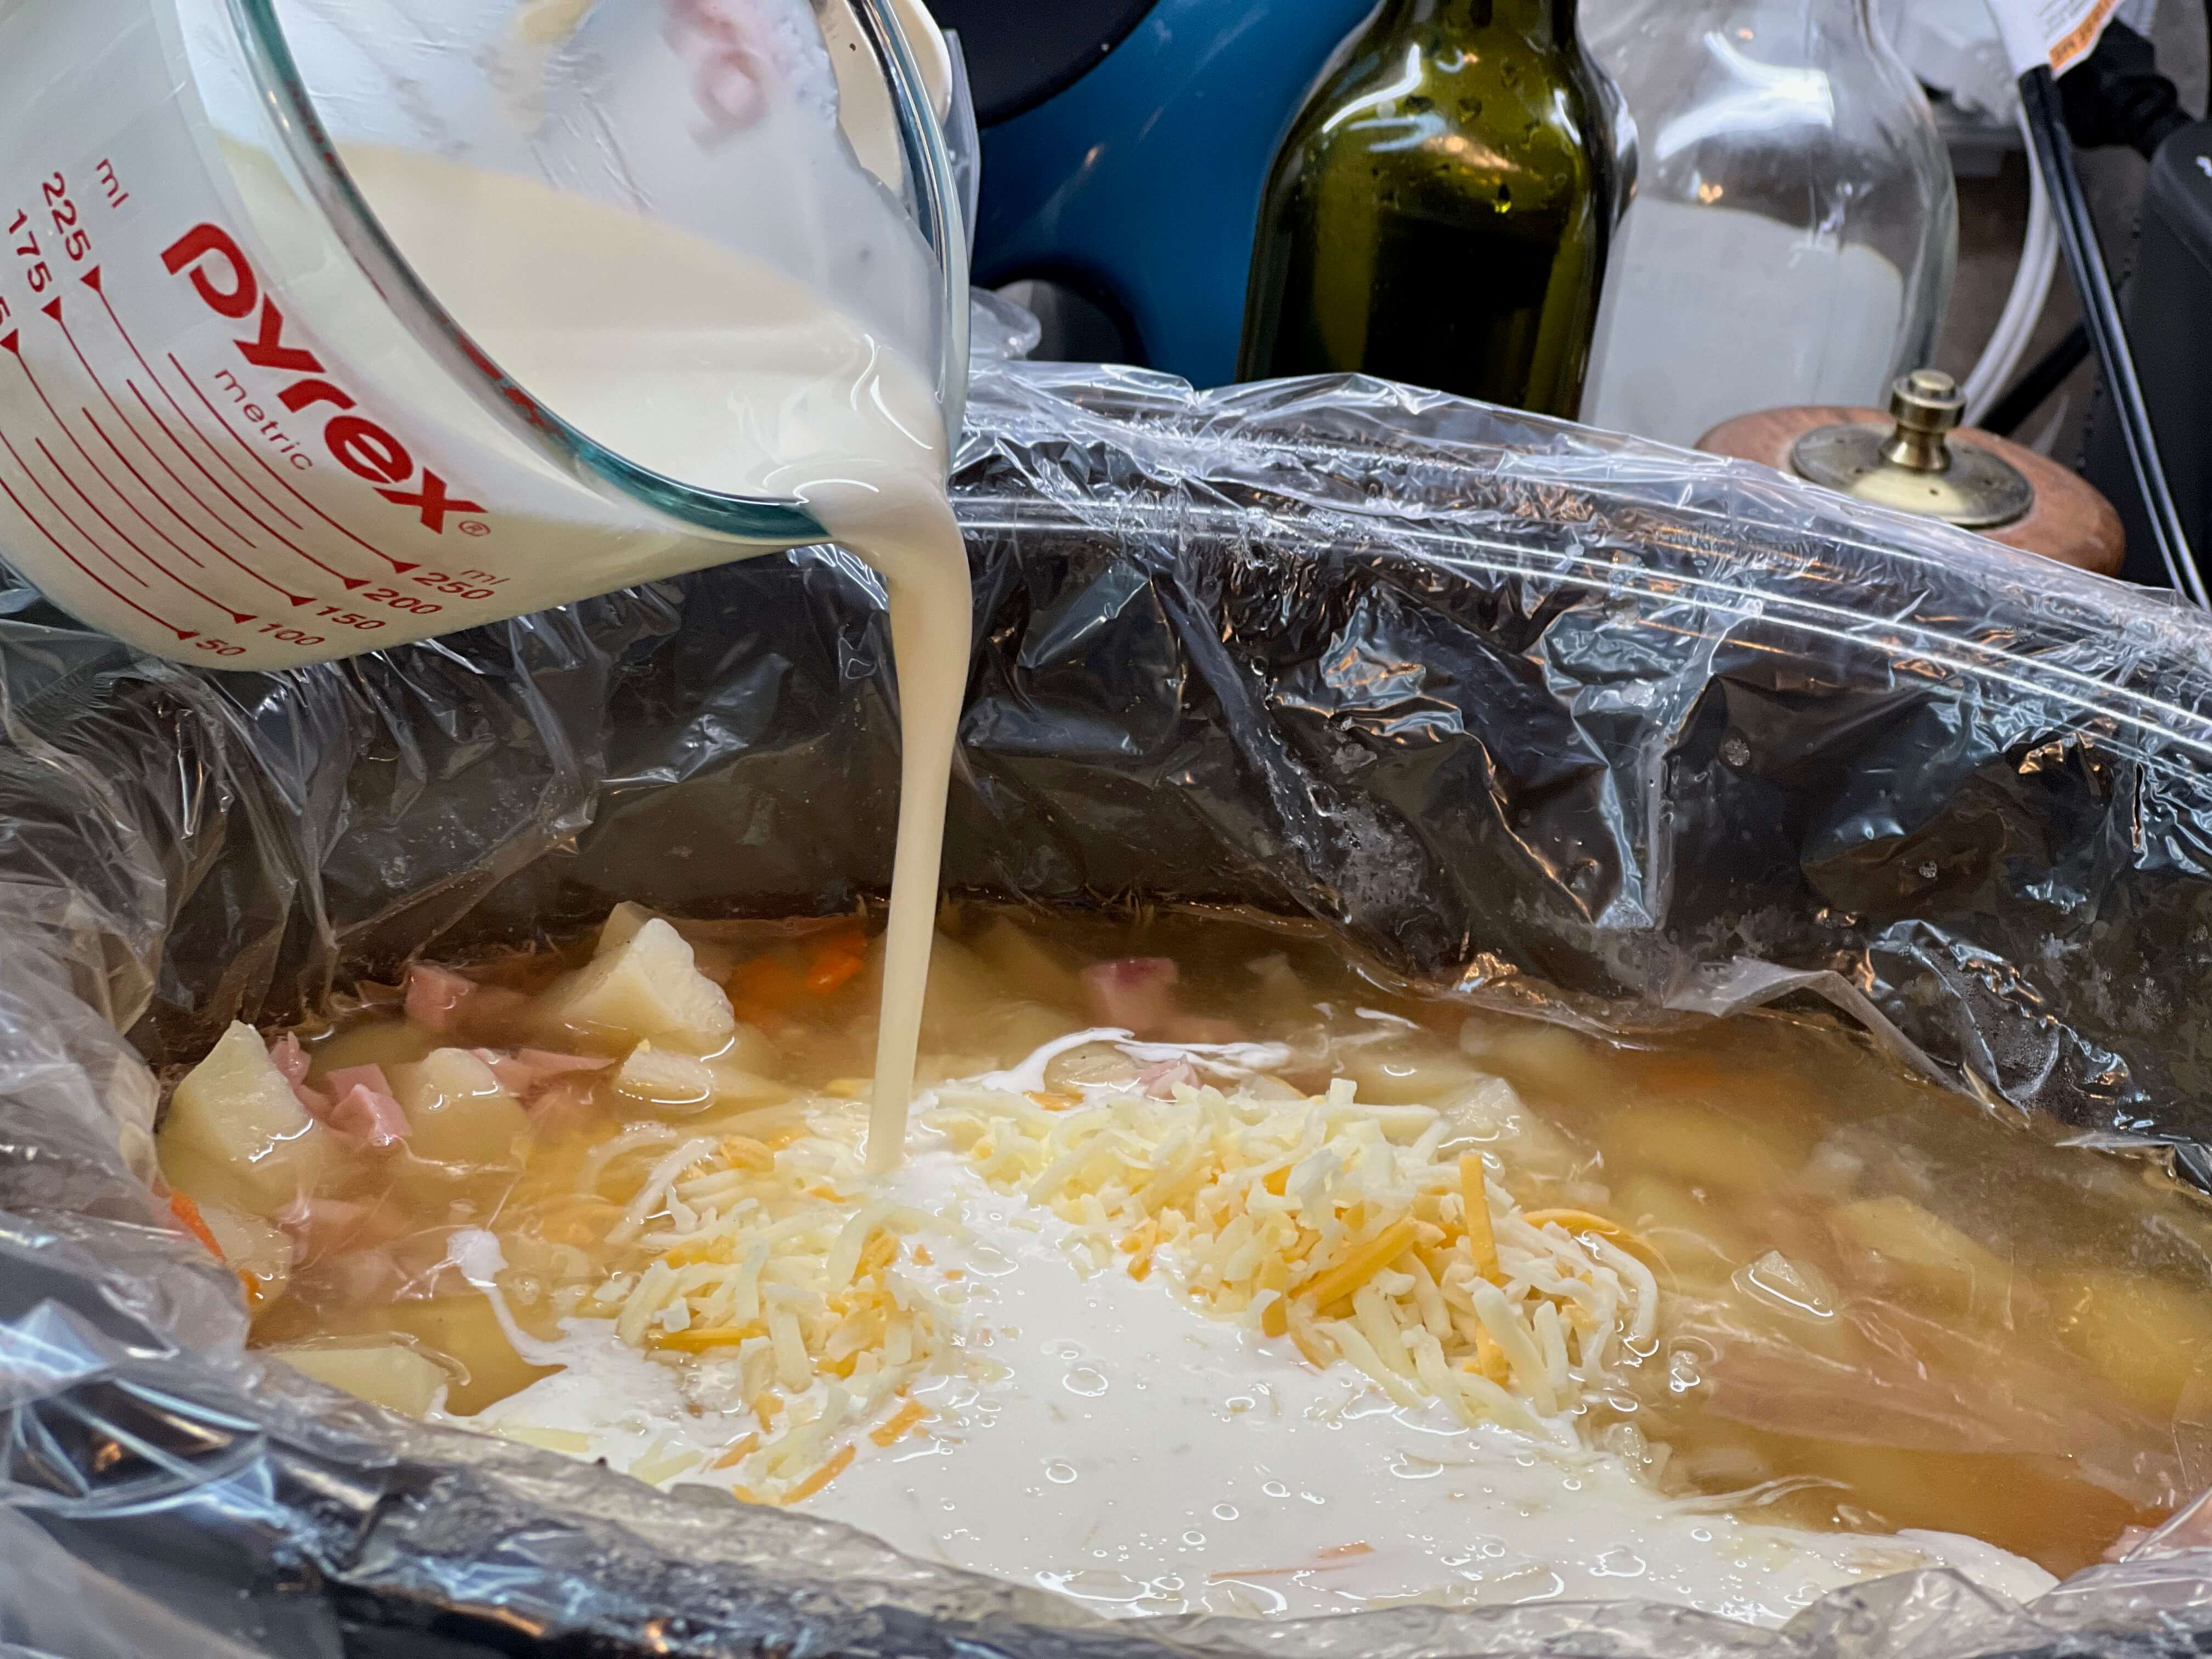 Once the potatoes are thoroughly done, add the heavy cream, cheese, and sour cream. Let cook for another 15-20 minutes.